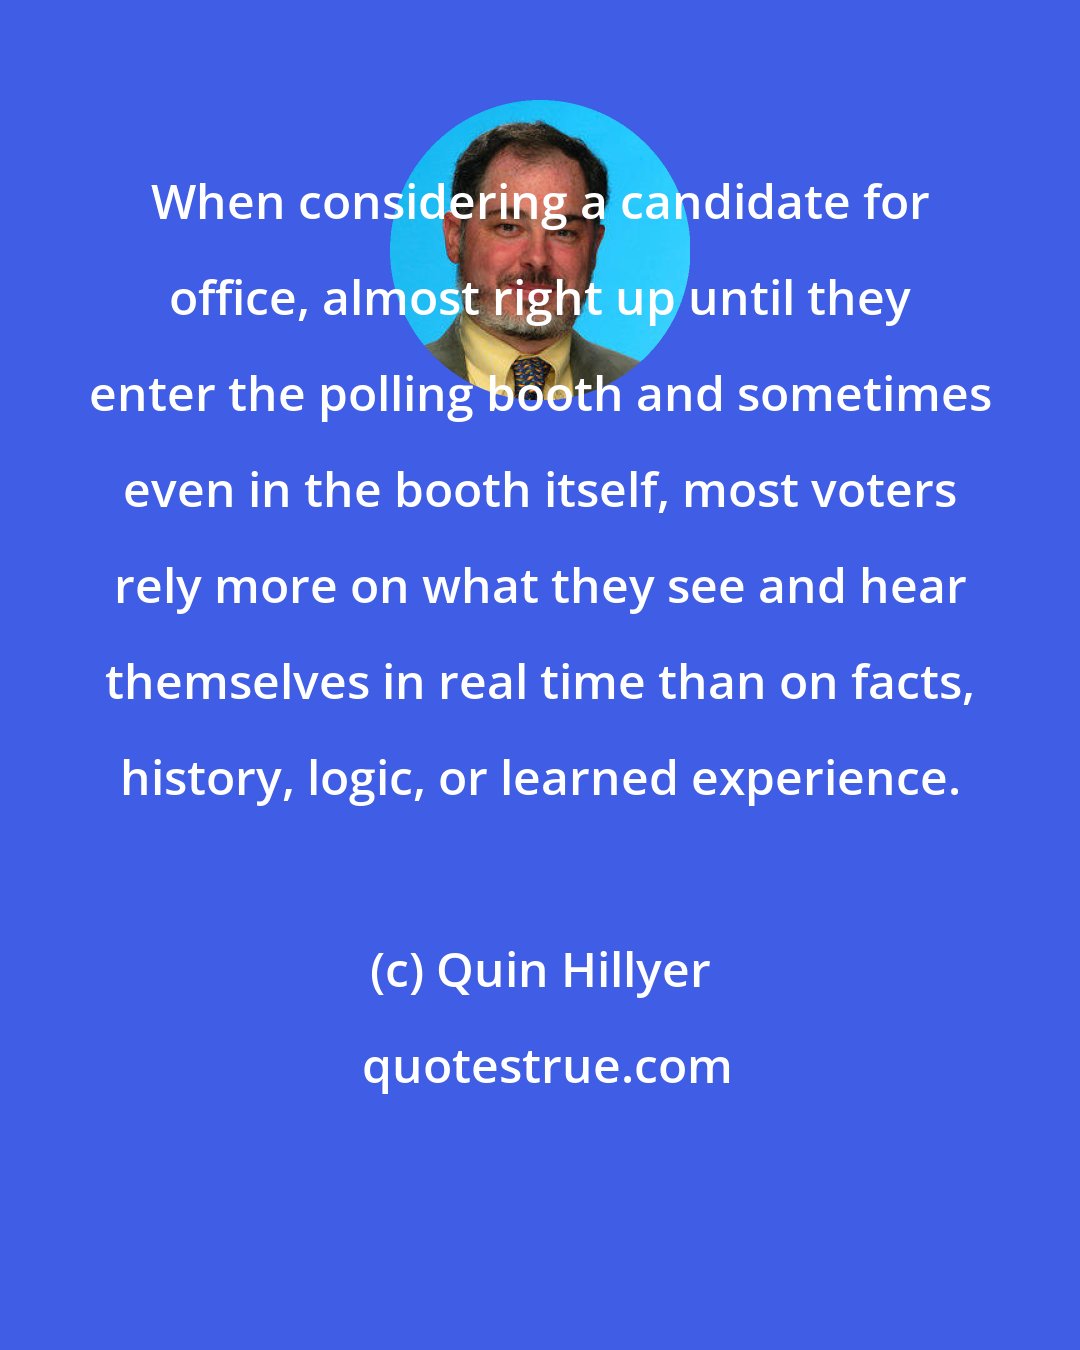 Quin Hillyer: When considering a candidate for office, almost right up until they enter the polling booth and sometimes even in the booth itself, most voters rely more on what they see and hear themselves in real time than on facts, history, logic, or learned experience.